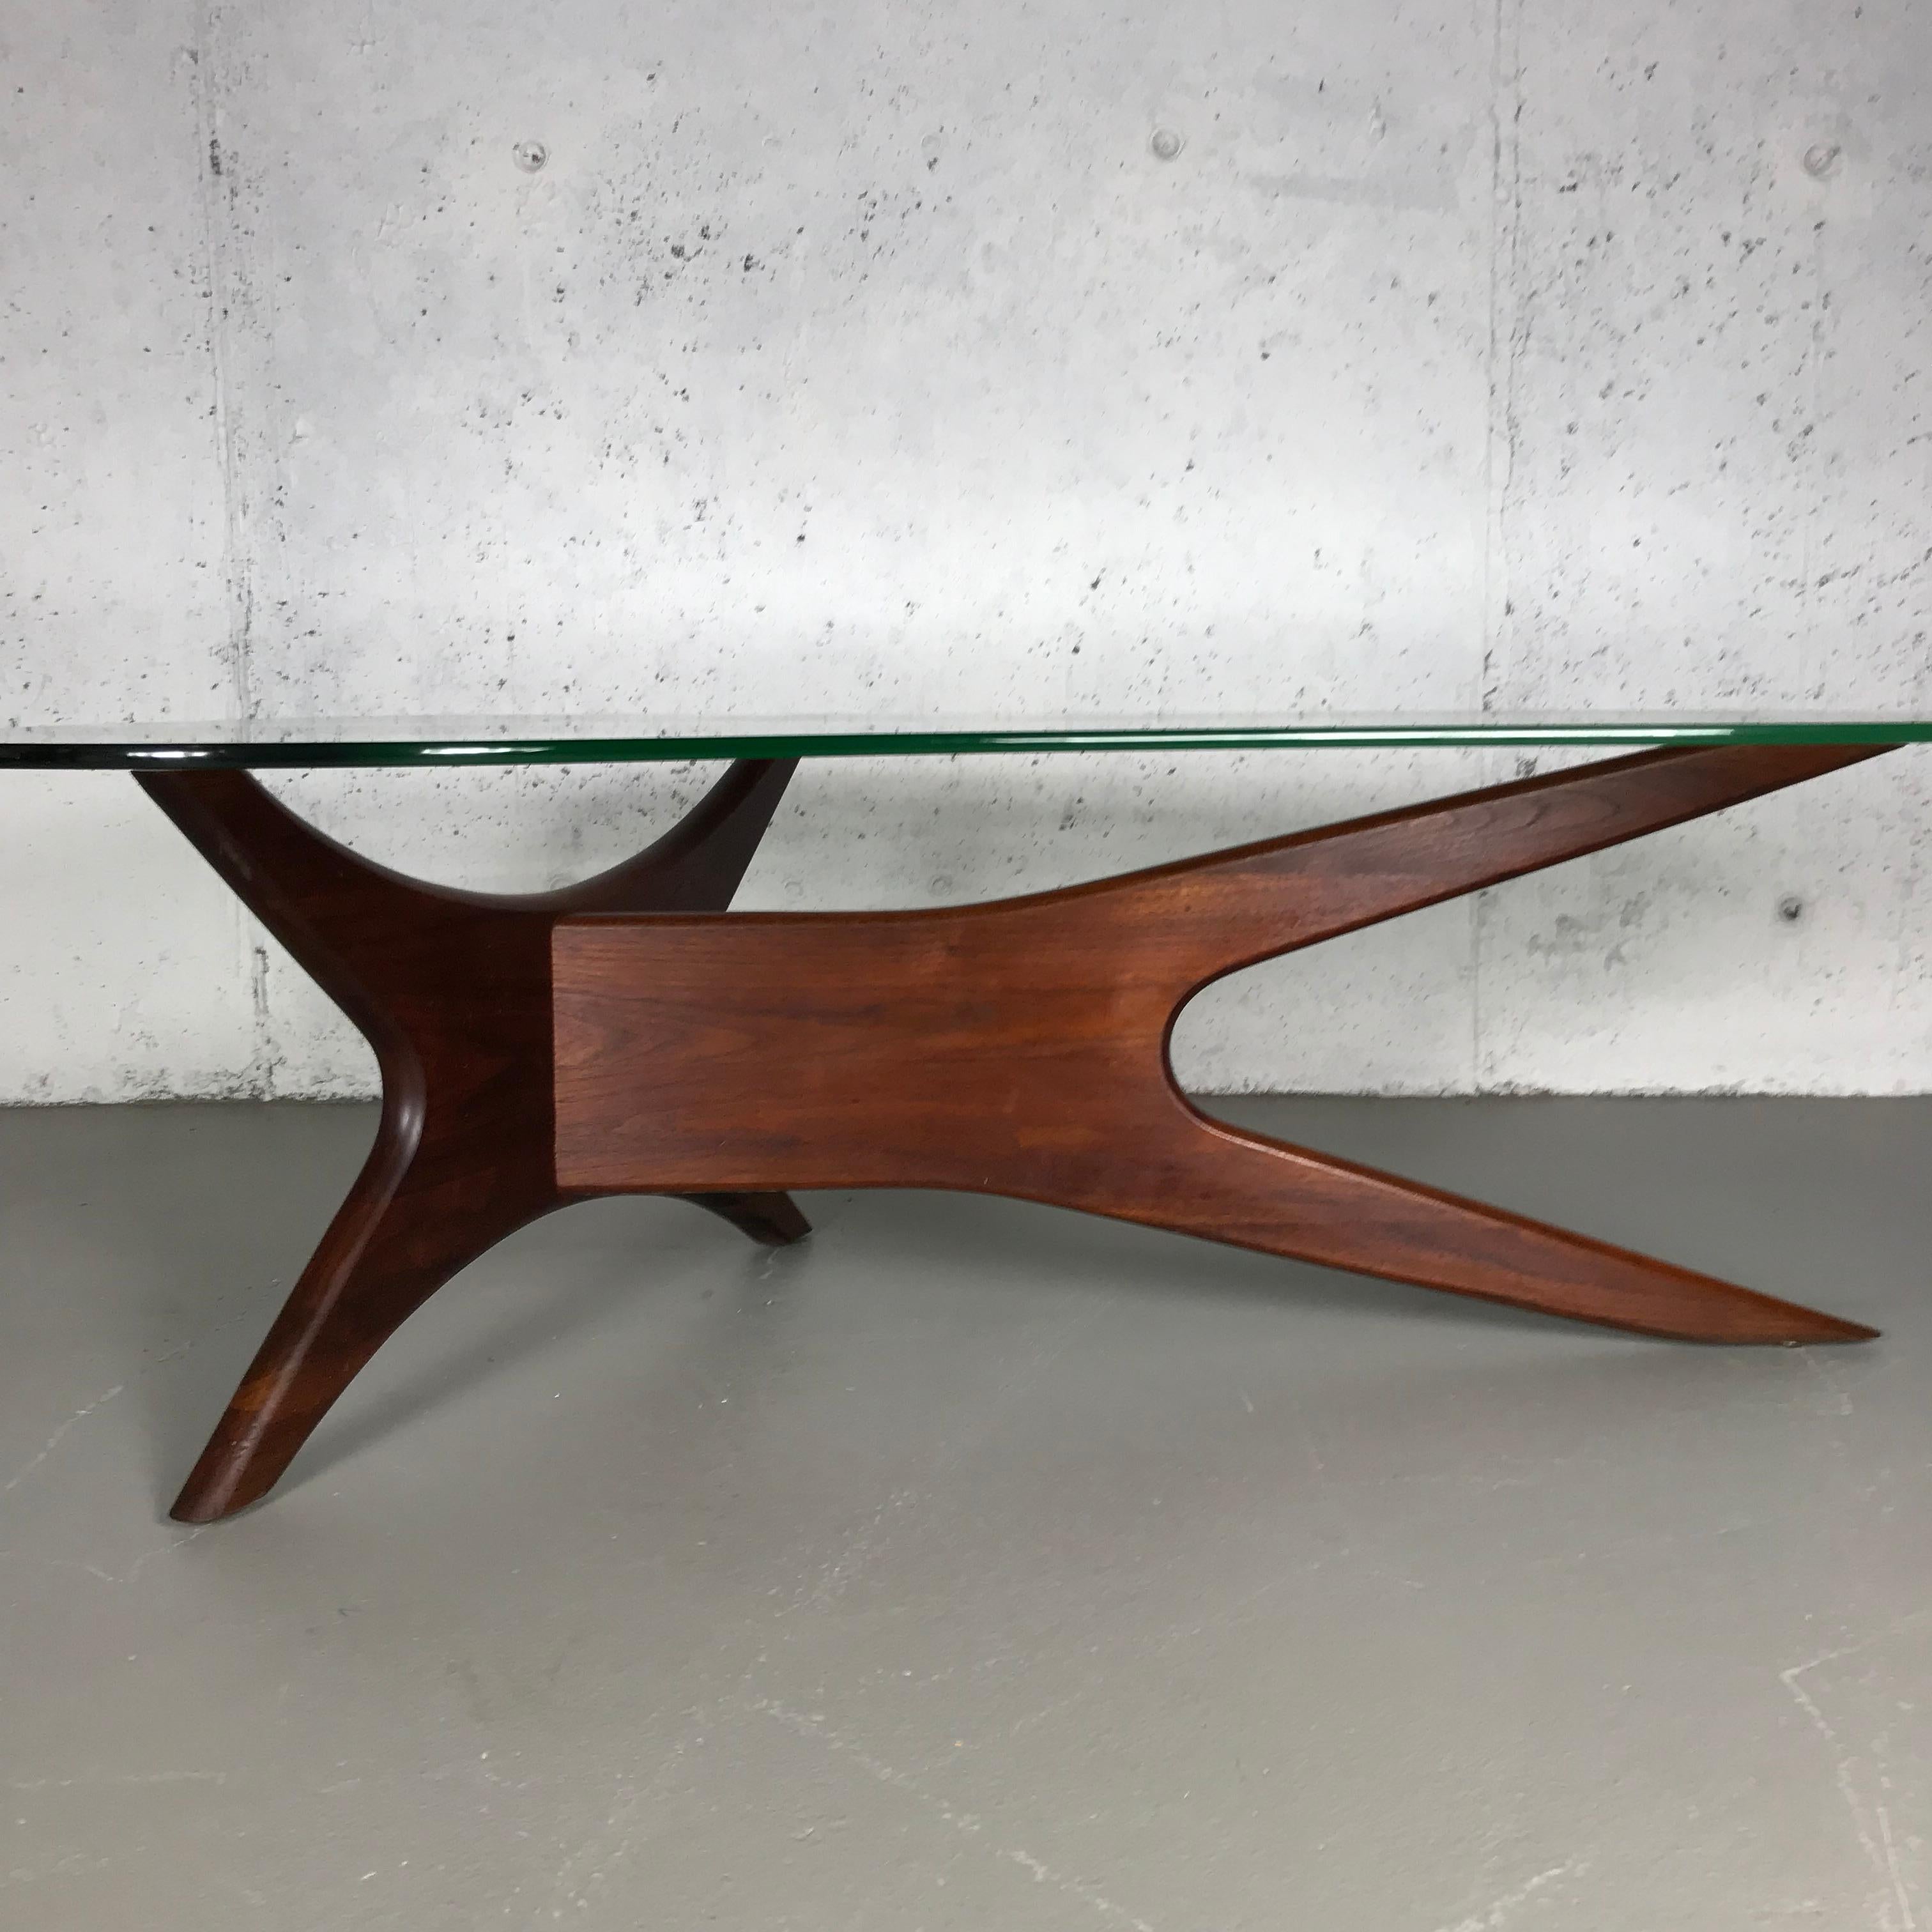 American Sculptural Cocktail Table by Adrian Pearsall for Craft Associates